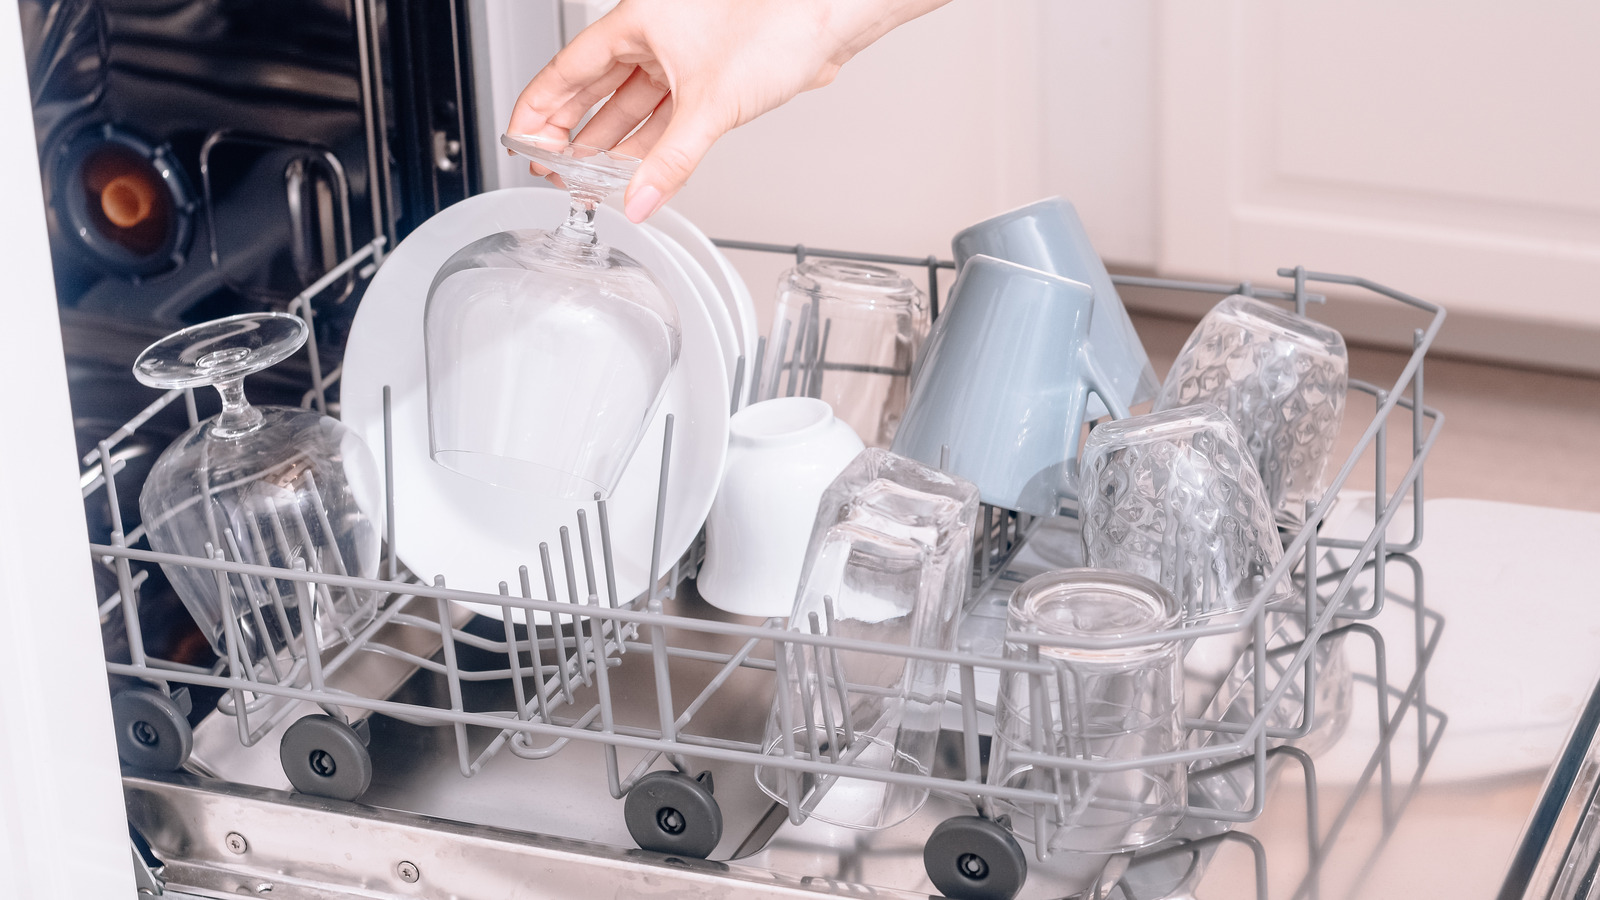 Should You Put Nonstick Pans in the Dishwasher?